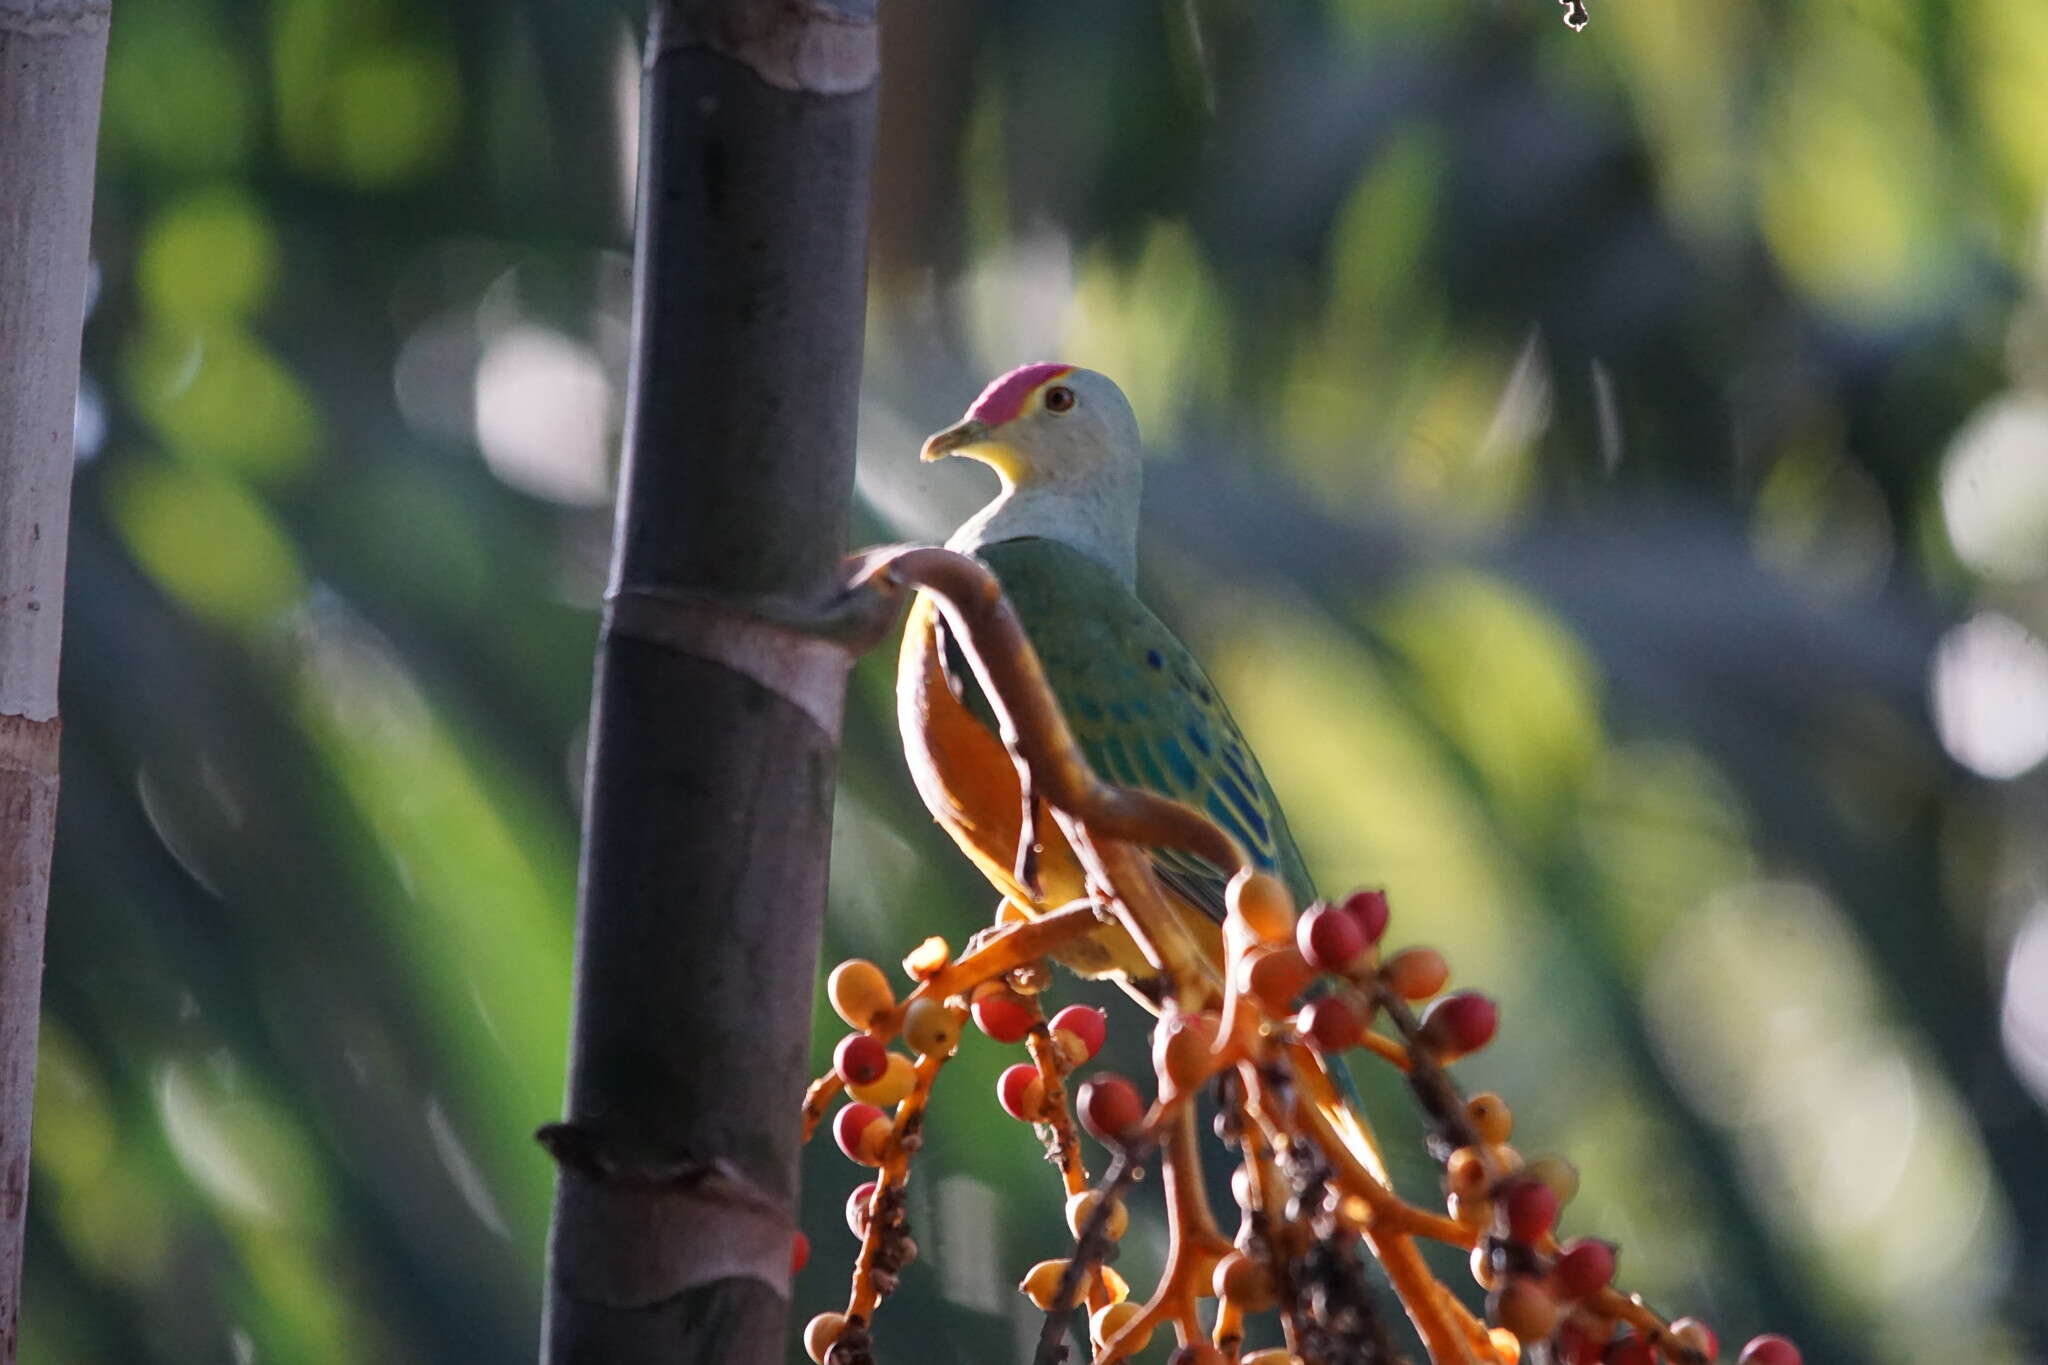 Image of Rose-crowned Fruit Dove